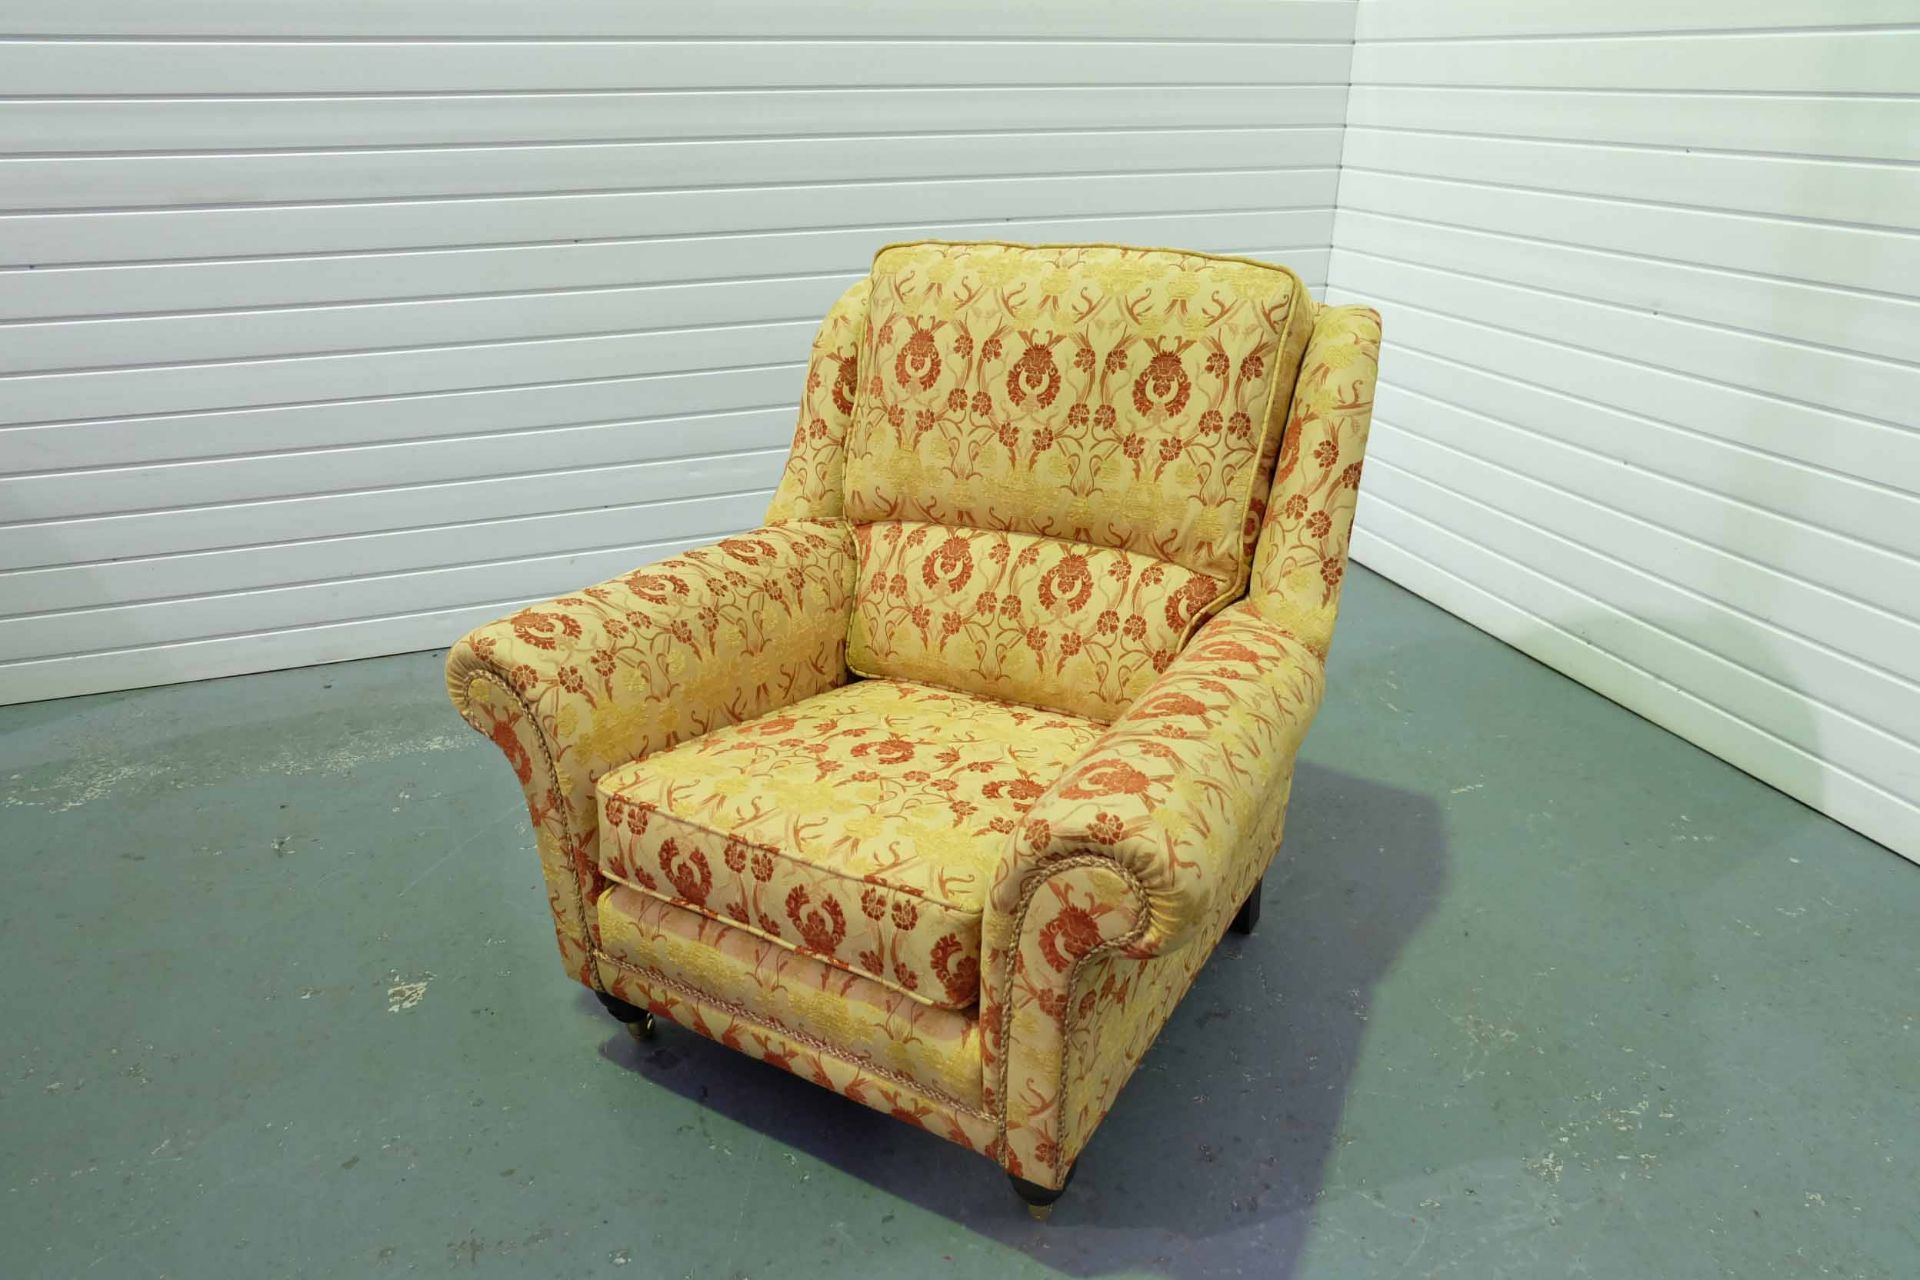 Steed Upholstery 'Lincoln' Range Fully Handmade Chair. Castor Wheels to the Front of the Chair. In - Image 2 of 3